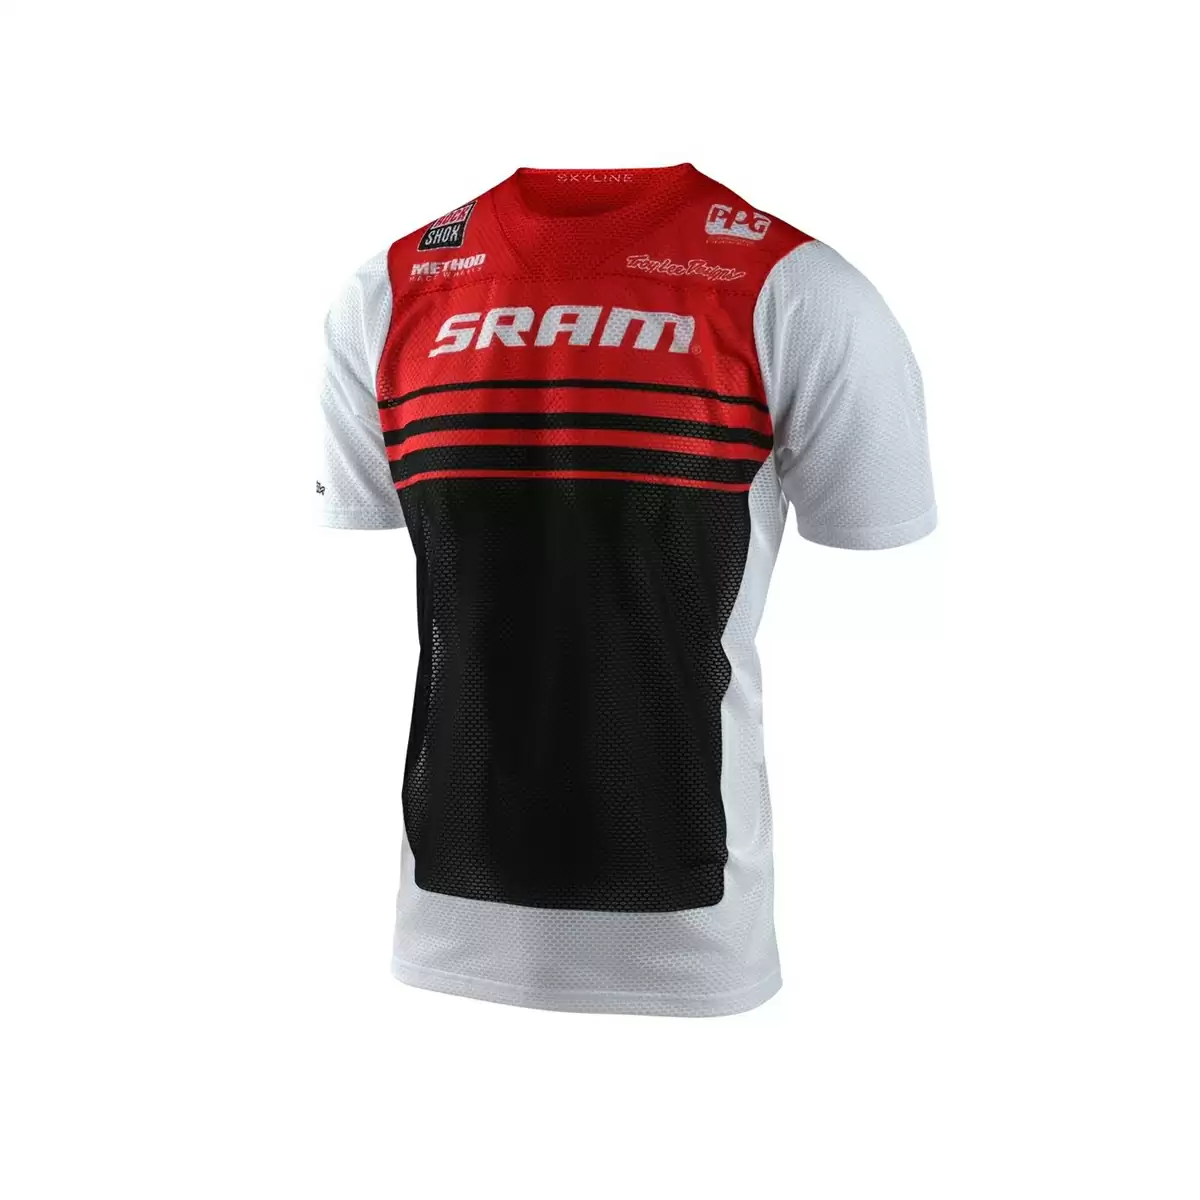 Maillot Skyline Air Sram Manches Courtes Noir/Rouge Taille XL - image